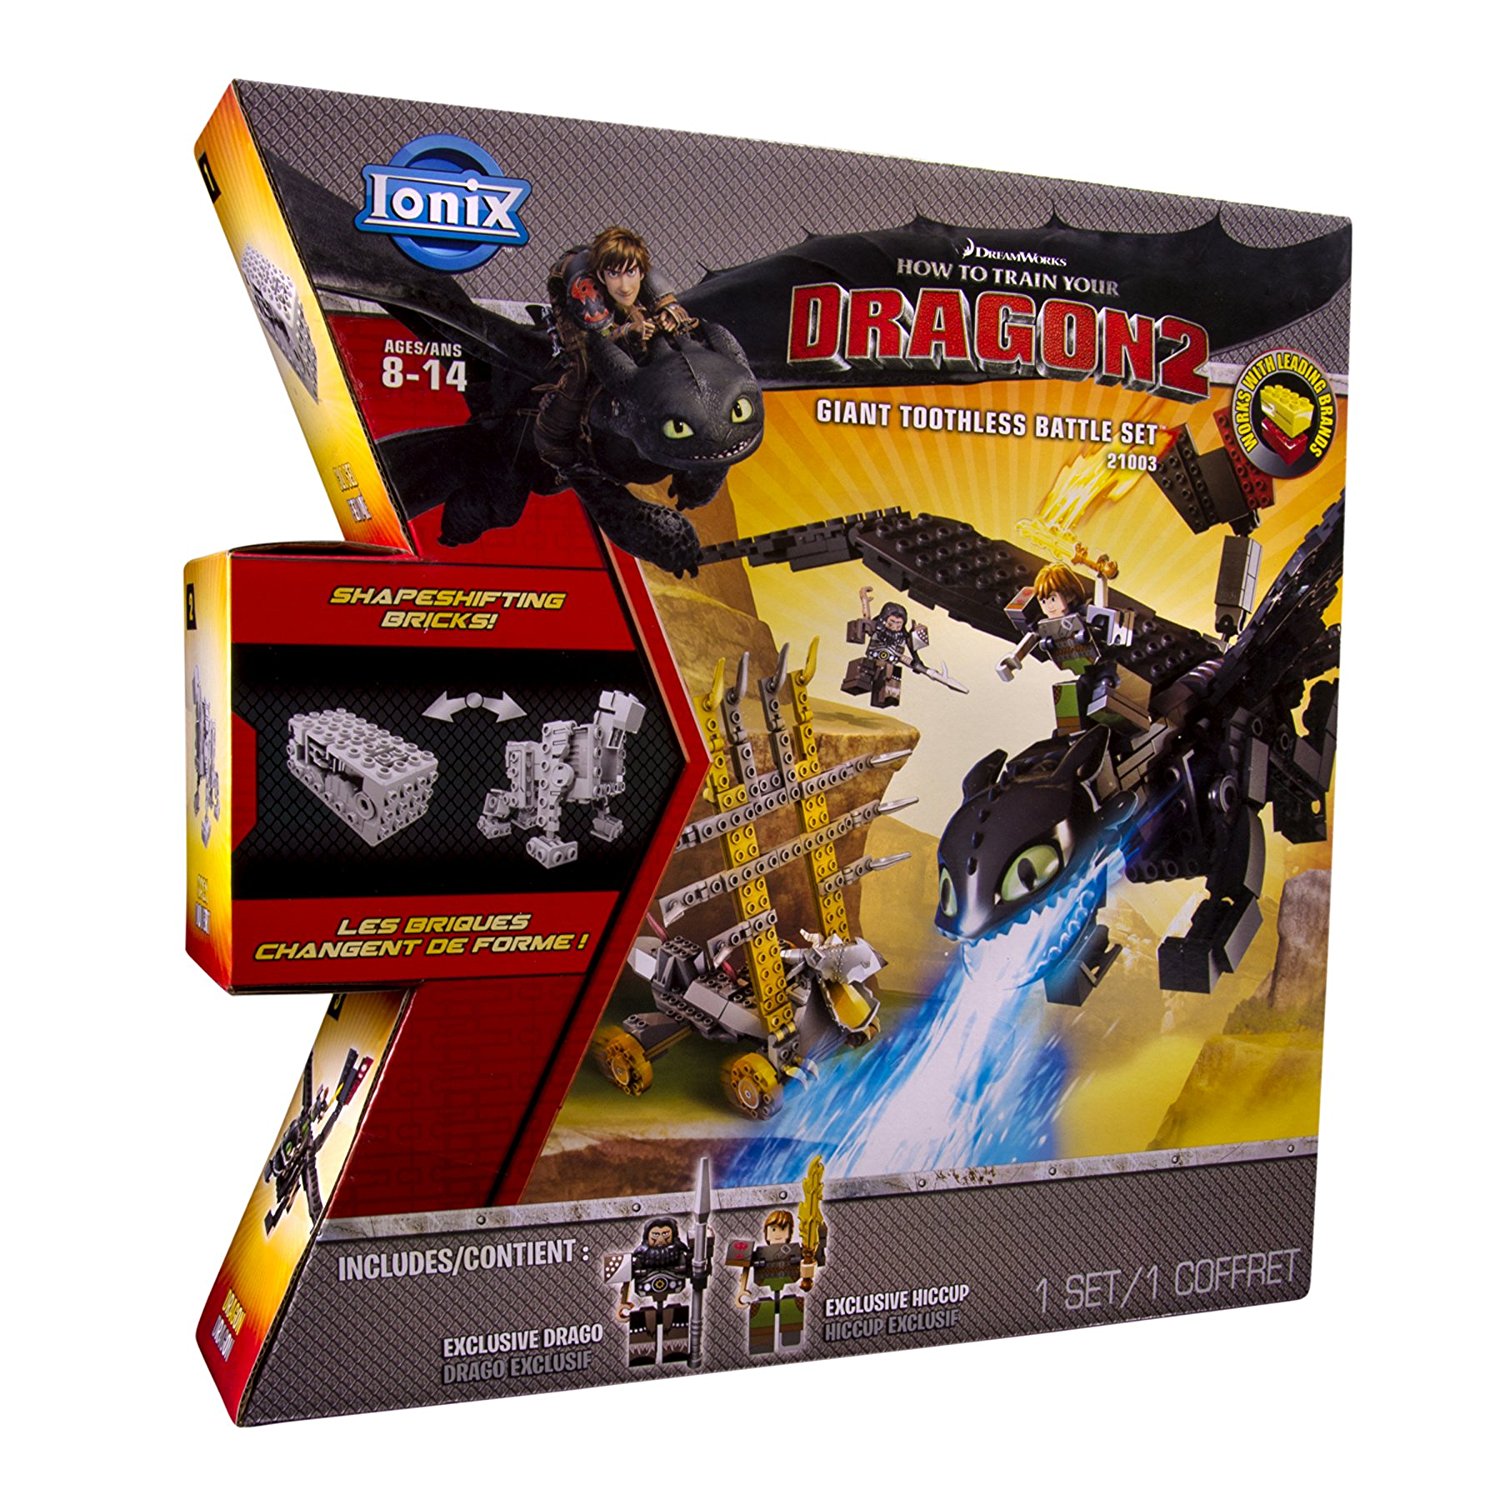 IONIX : How To Train Your Dragon 2 - Giant Toothless Battle Set